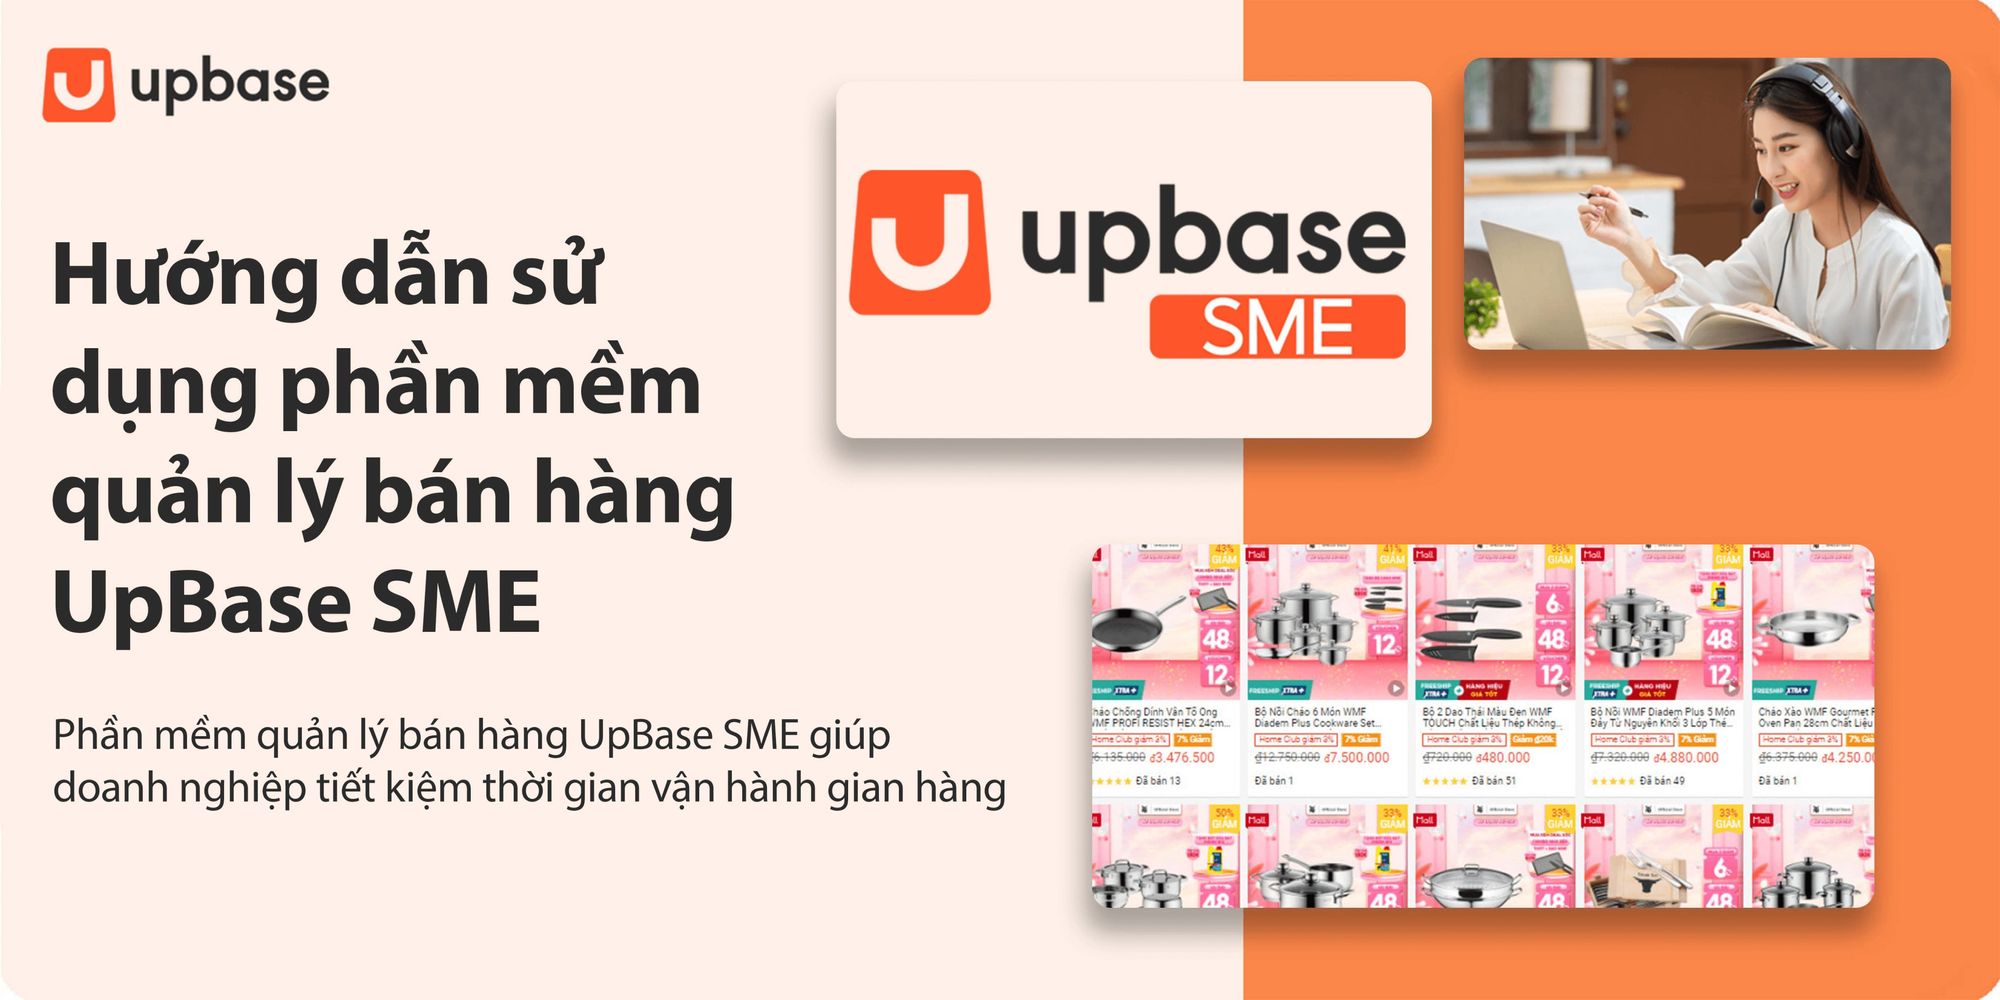 Guide to Using UpBase SMEs Multichannel Sales Management Software